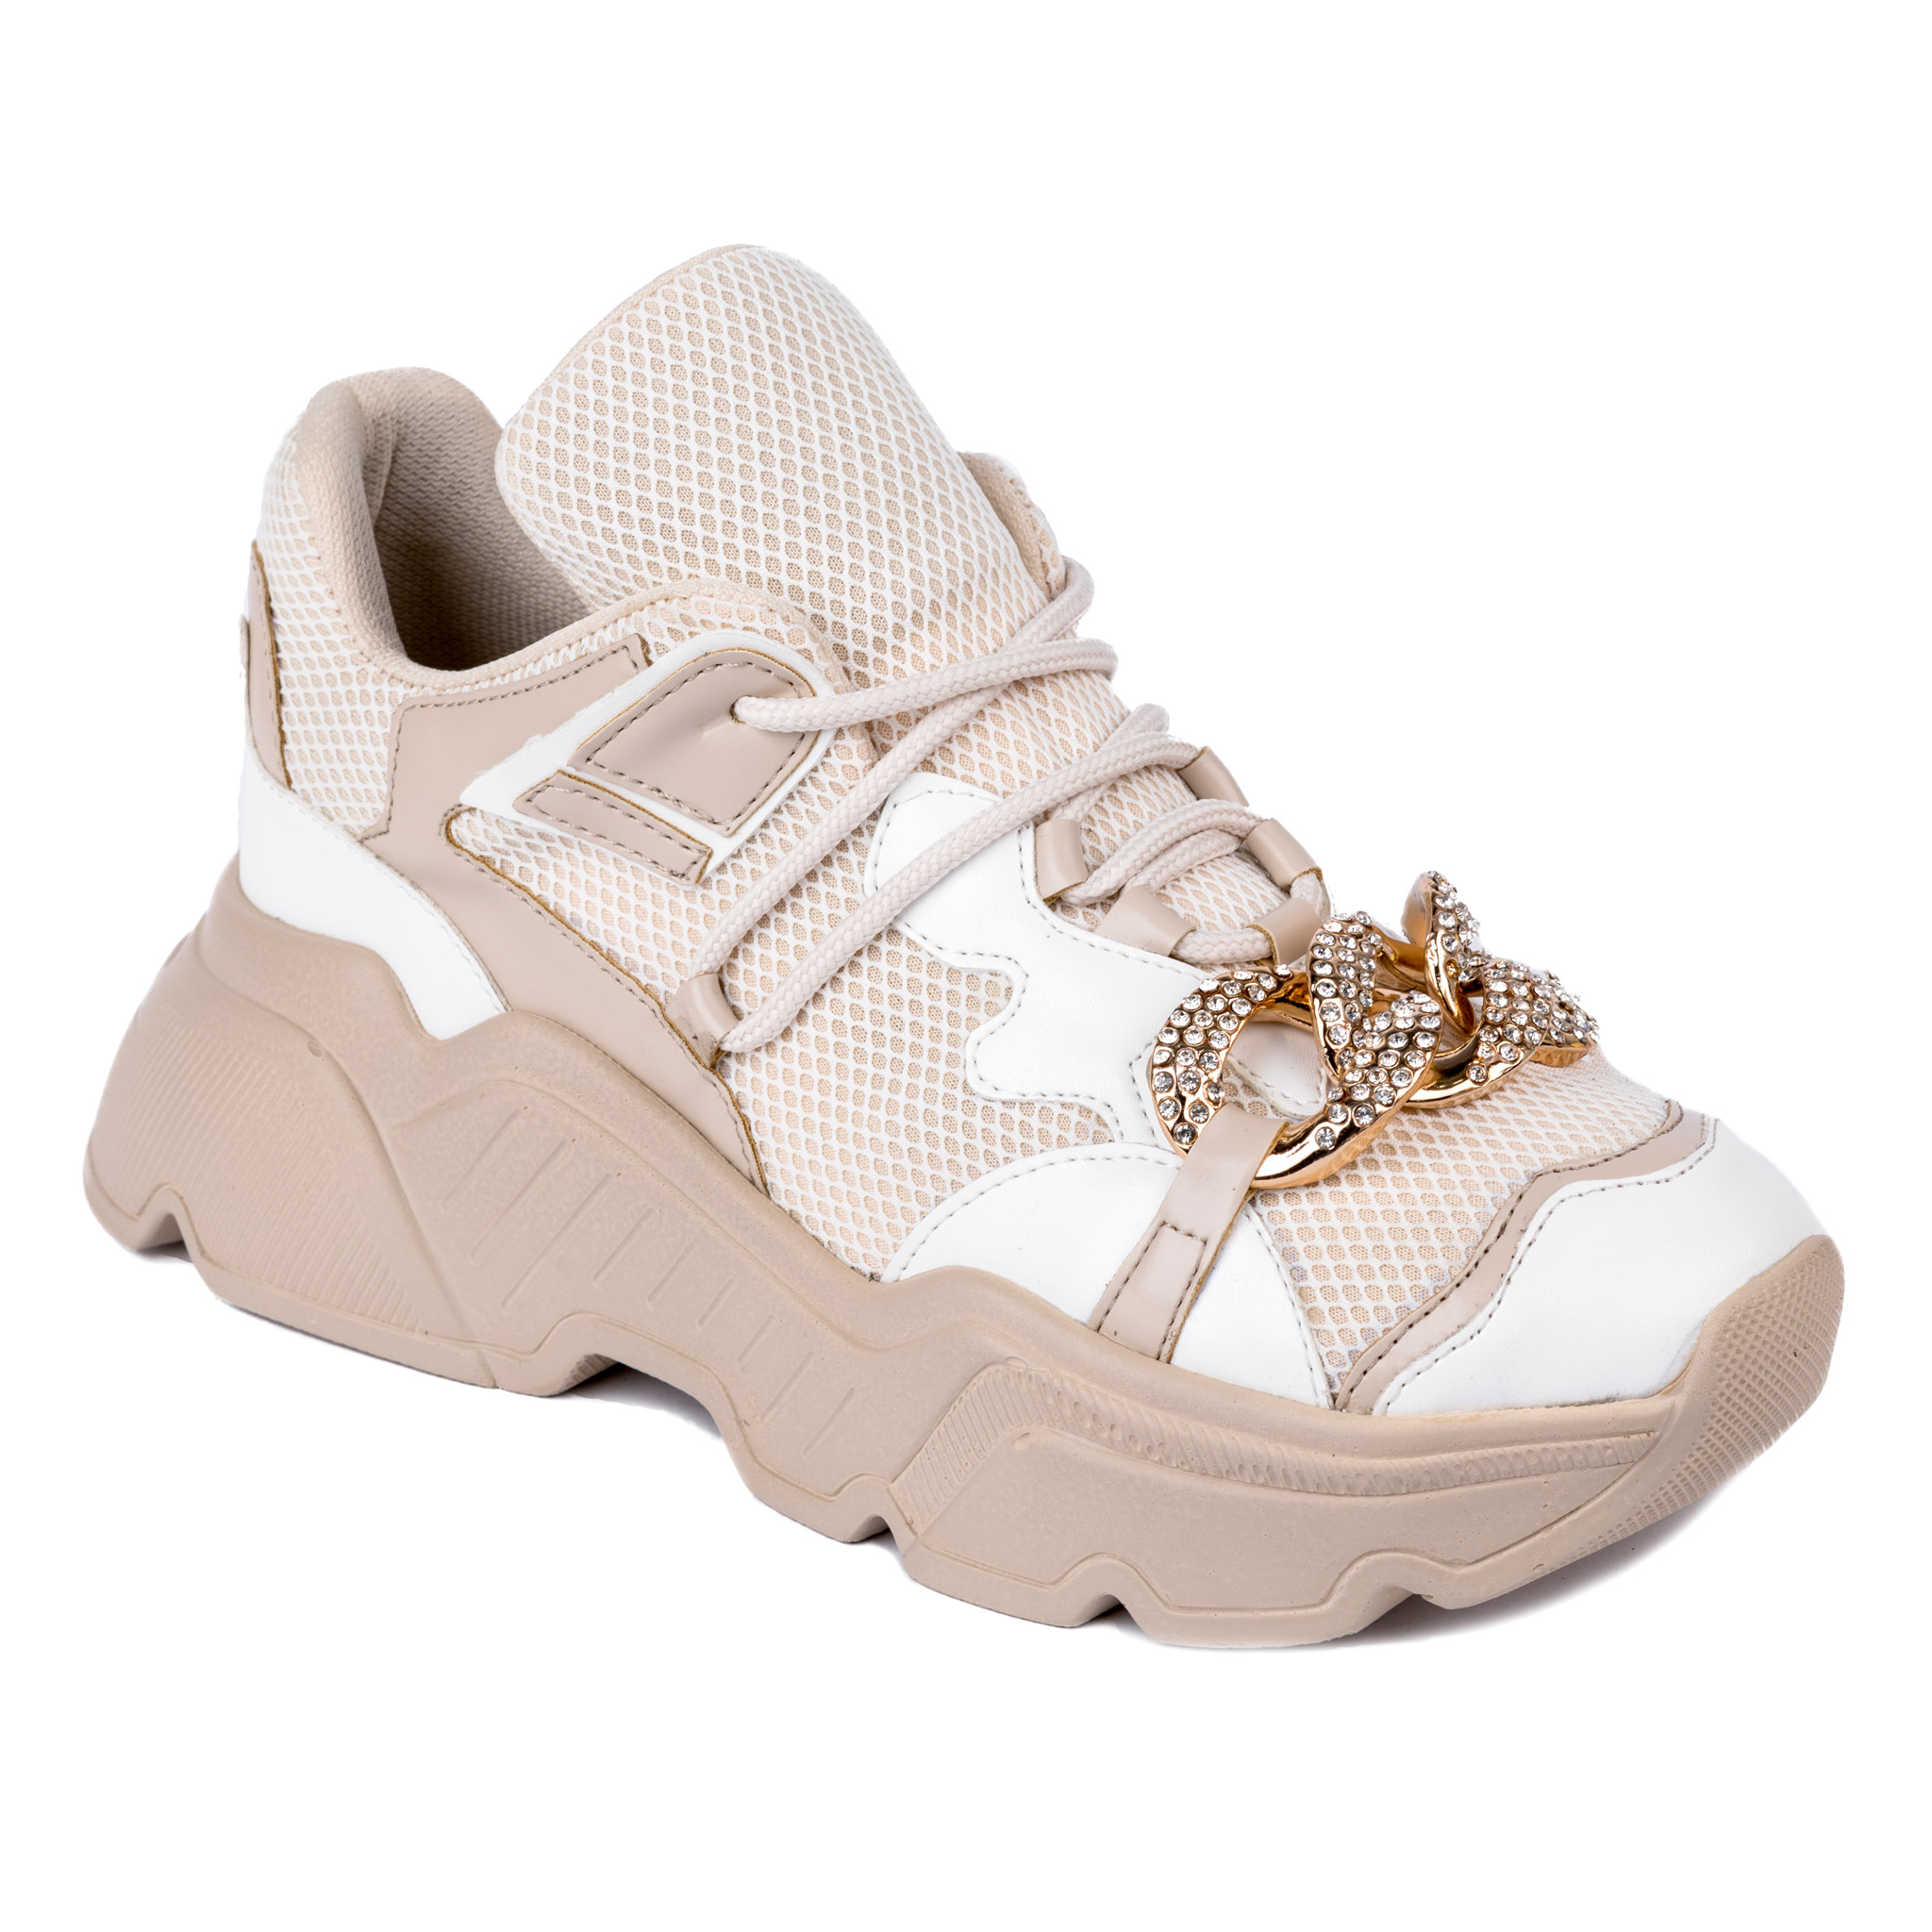 SNEAKERS WITH ORANAMENTS - BEIGE